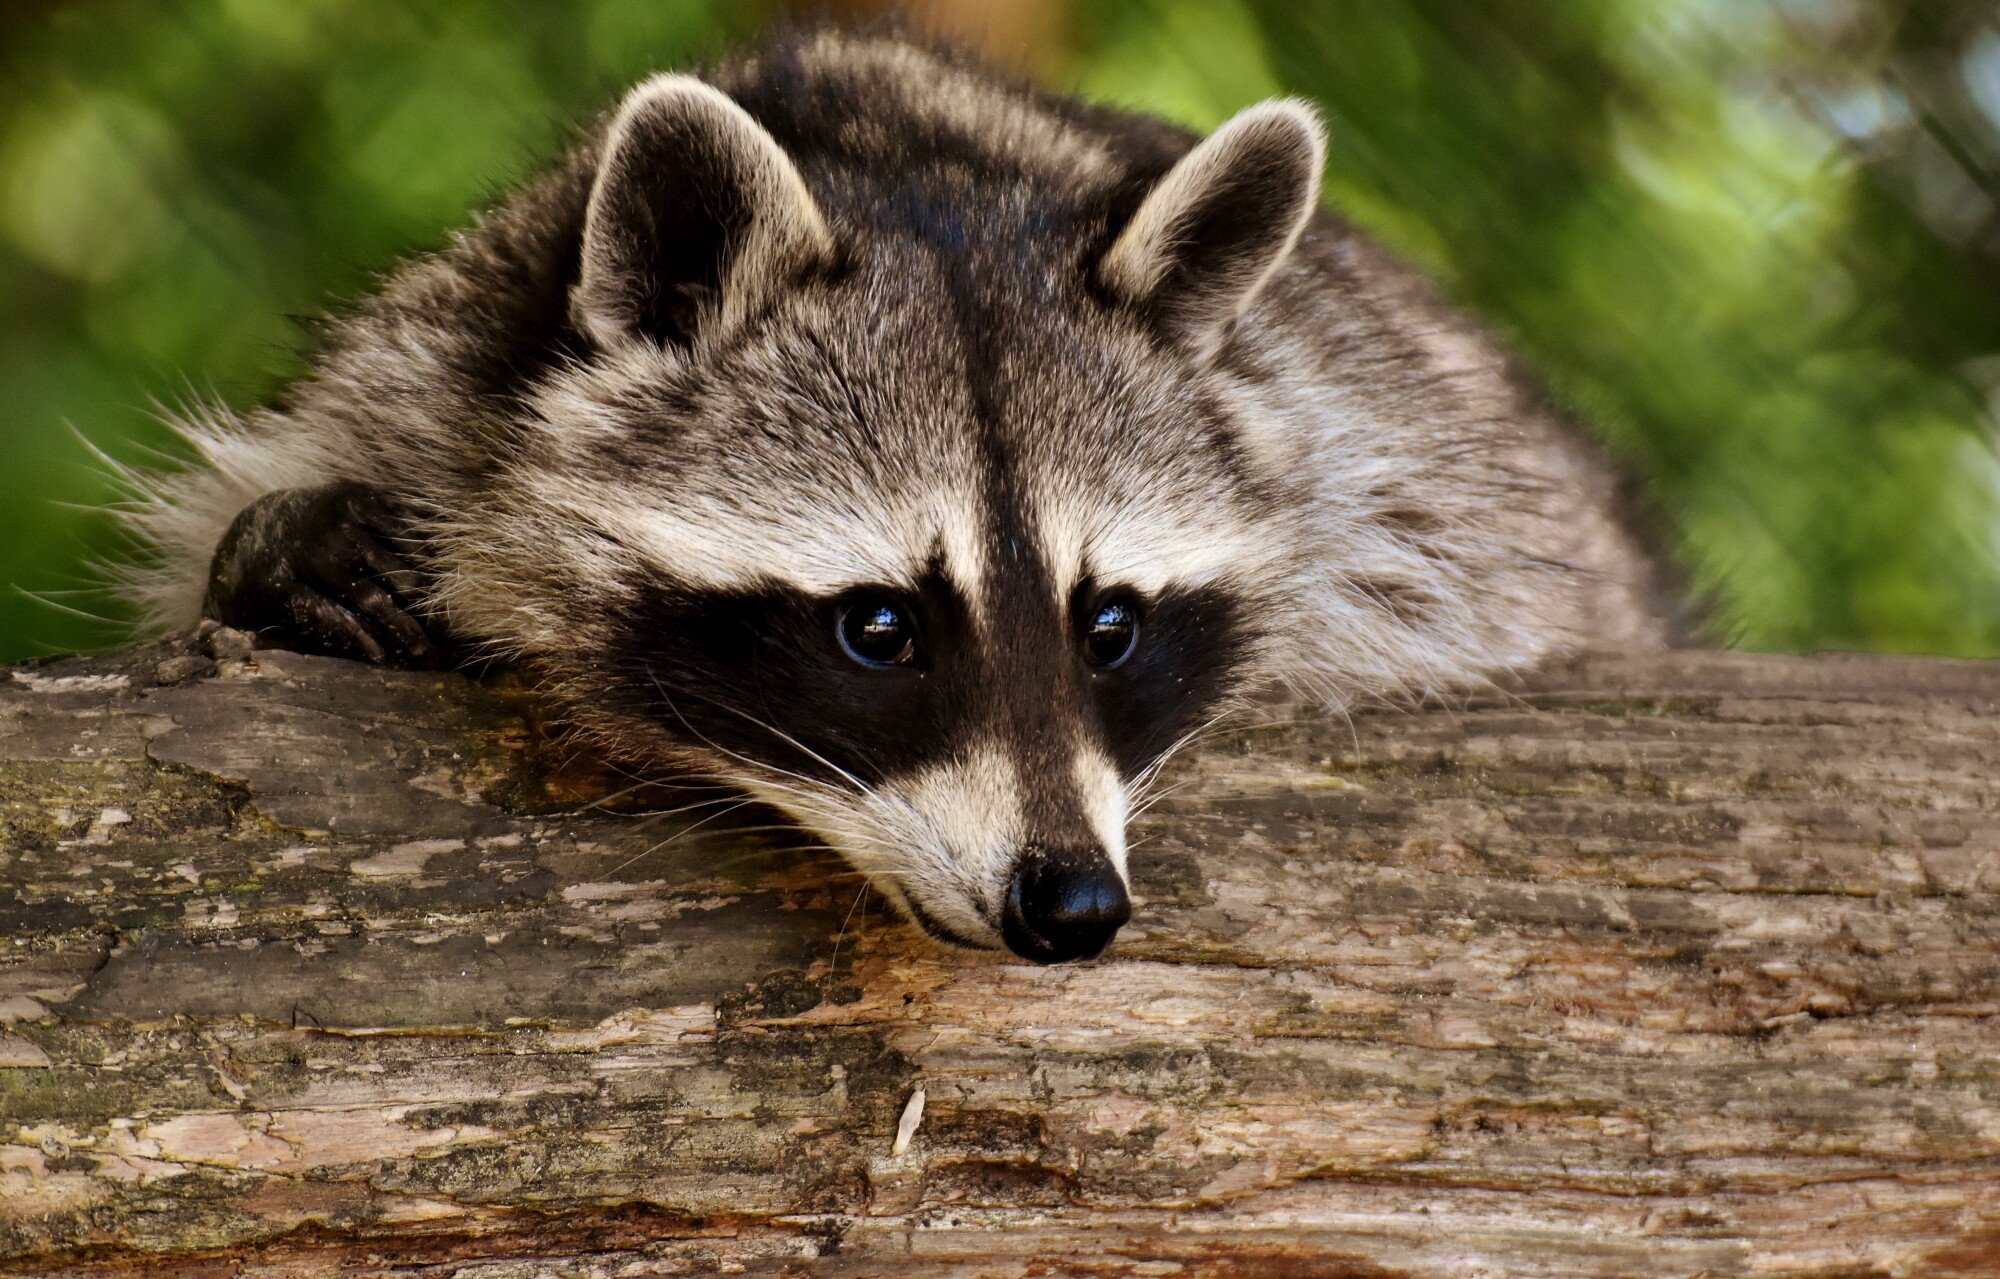 Raccoon Removal: How to Prevent and Remove Raccoons on Your Property